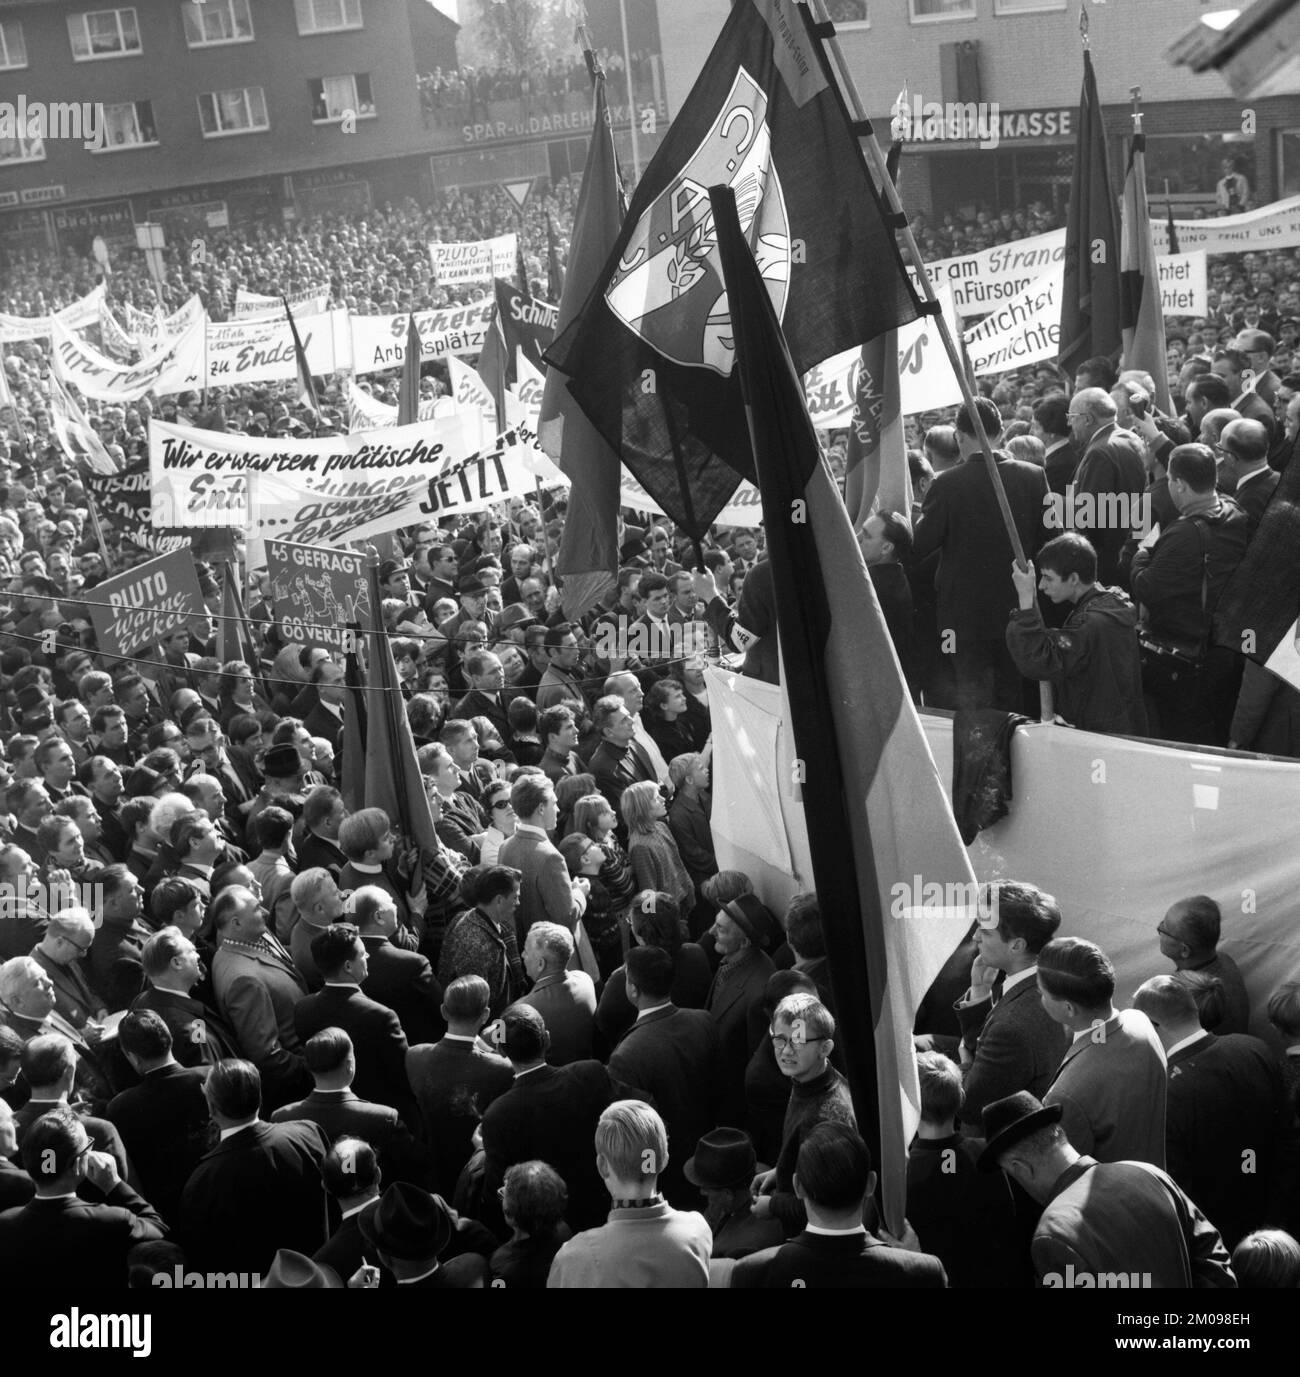 A wave of outrage swept the Ruhr area when the Hansa mine was closed, here during demonstrations in Dortmund-Huckarde, Germany, on 21 October 1967, Eu Stock Photo